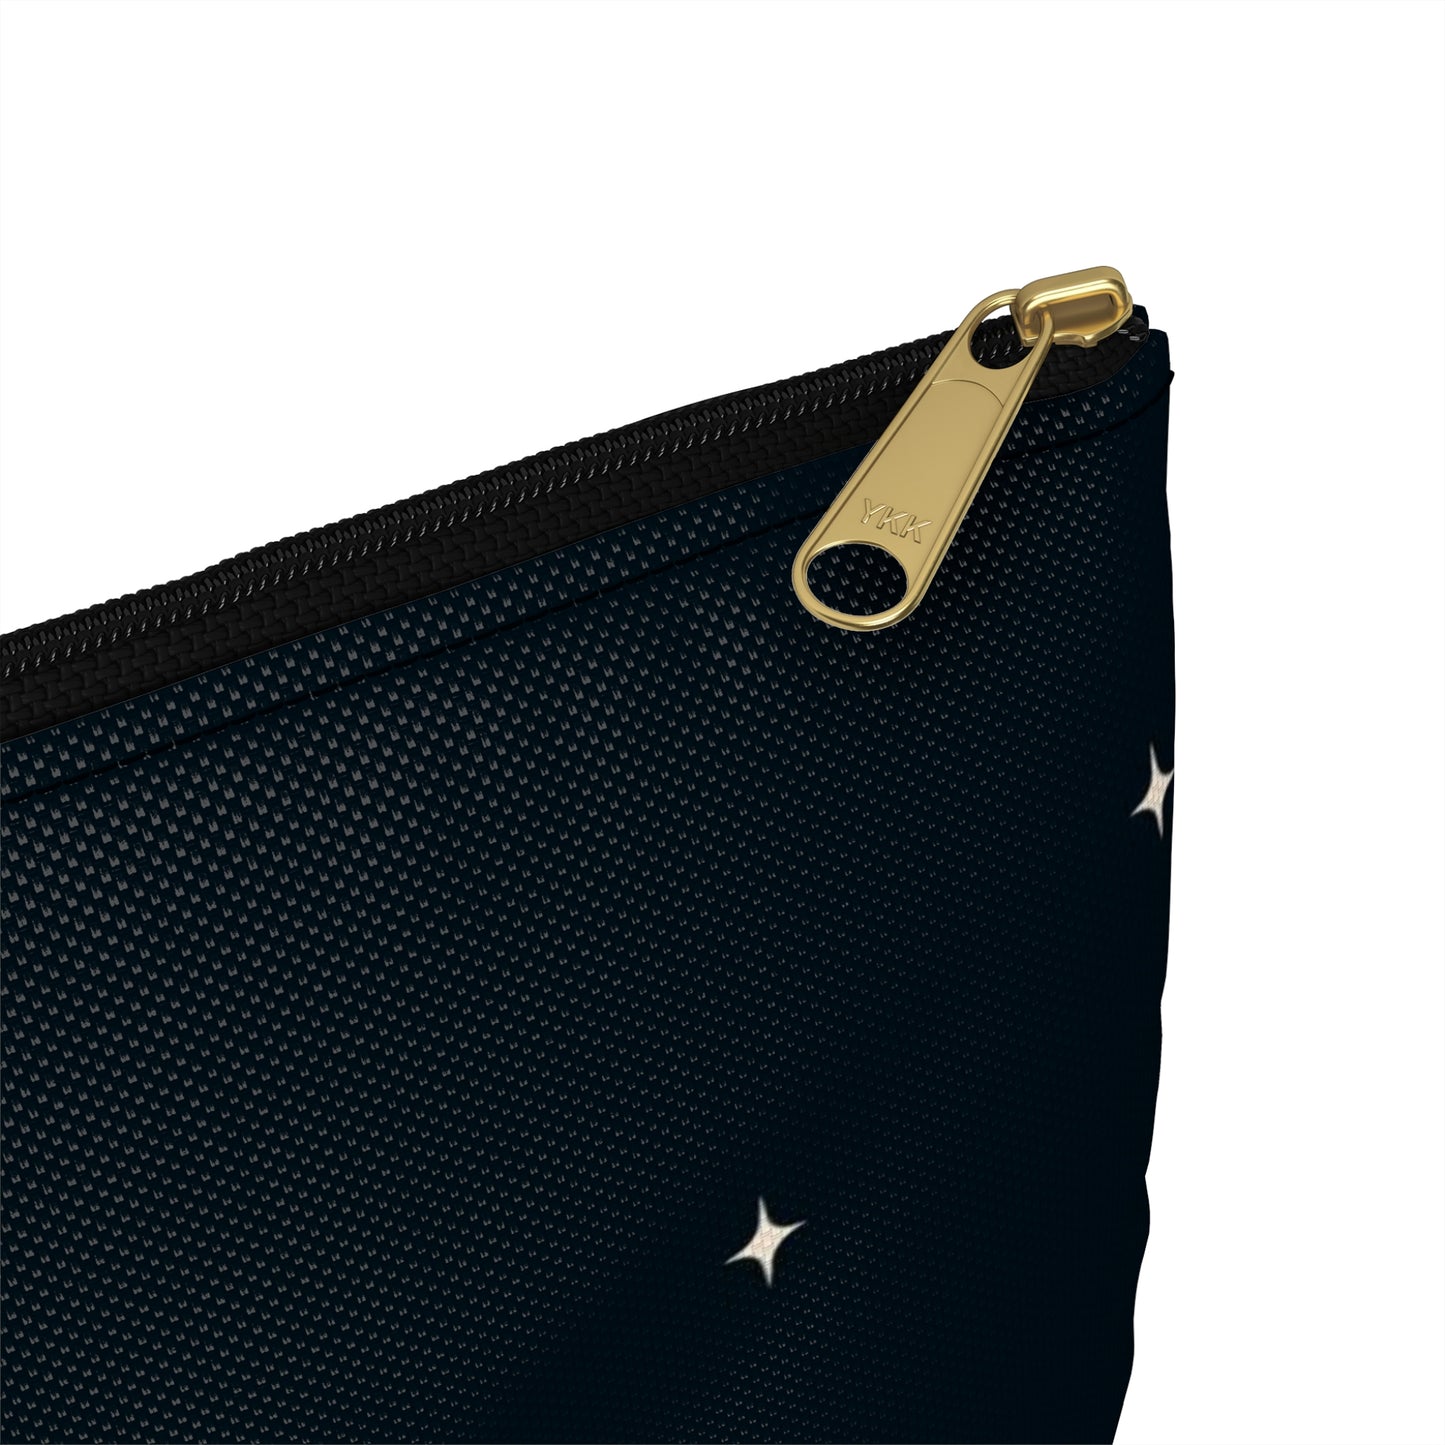 Flat Zipper Pouch - Pile of Hearts on Navy